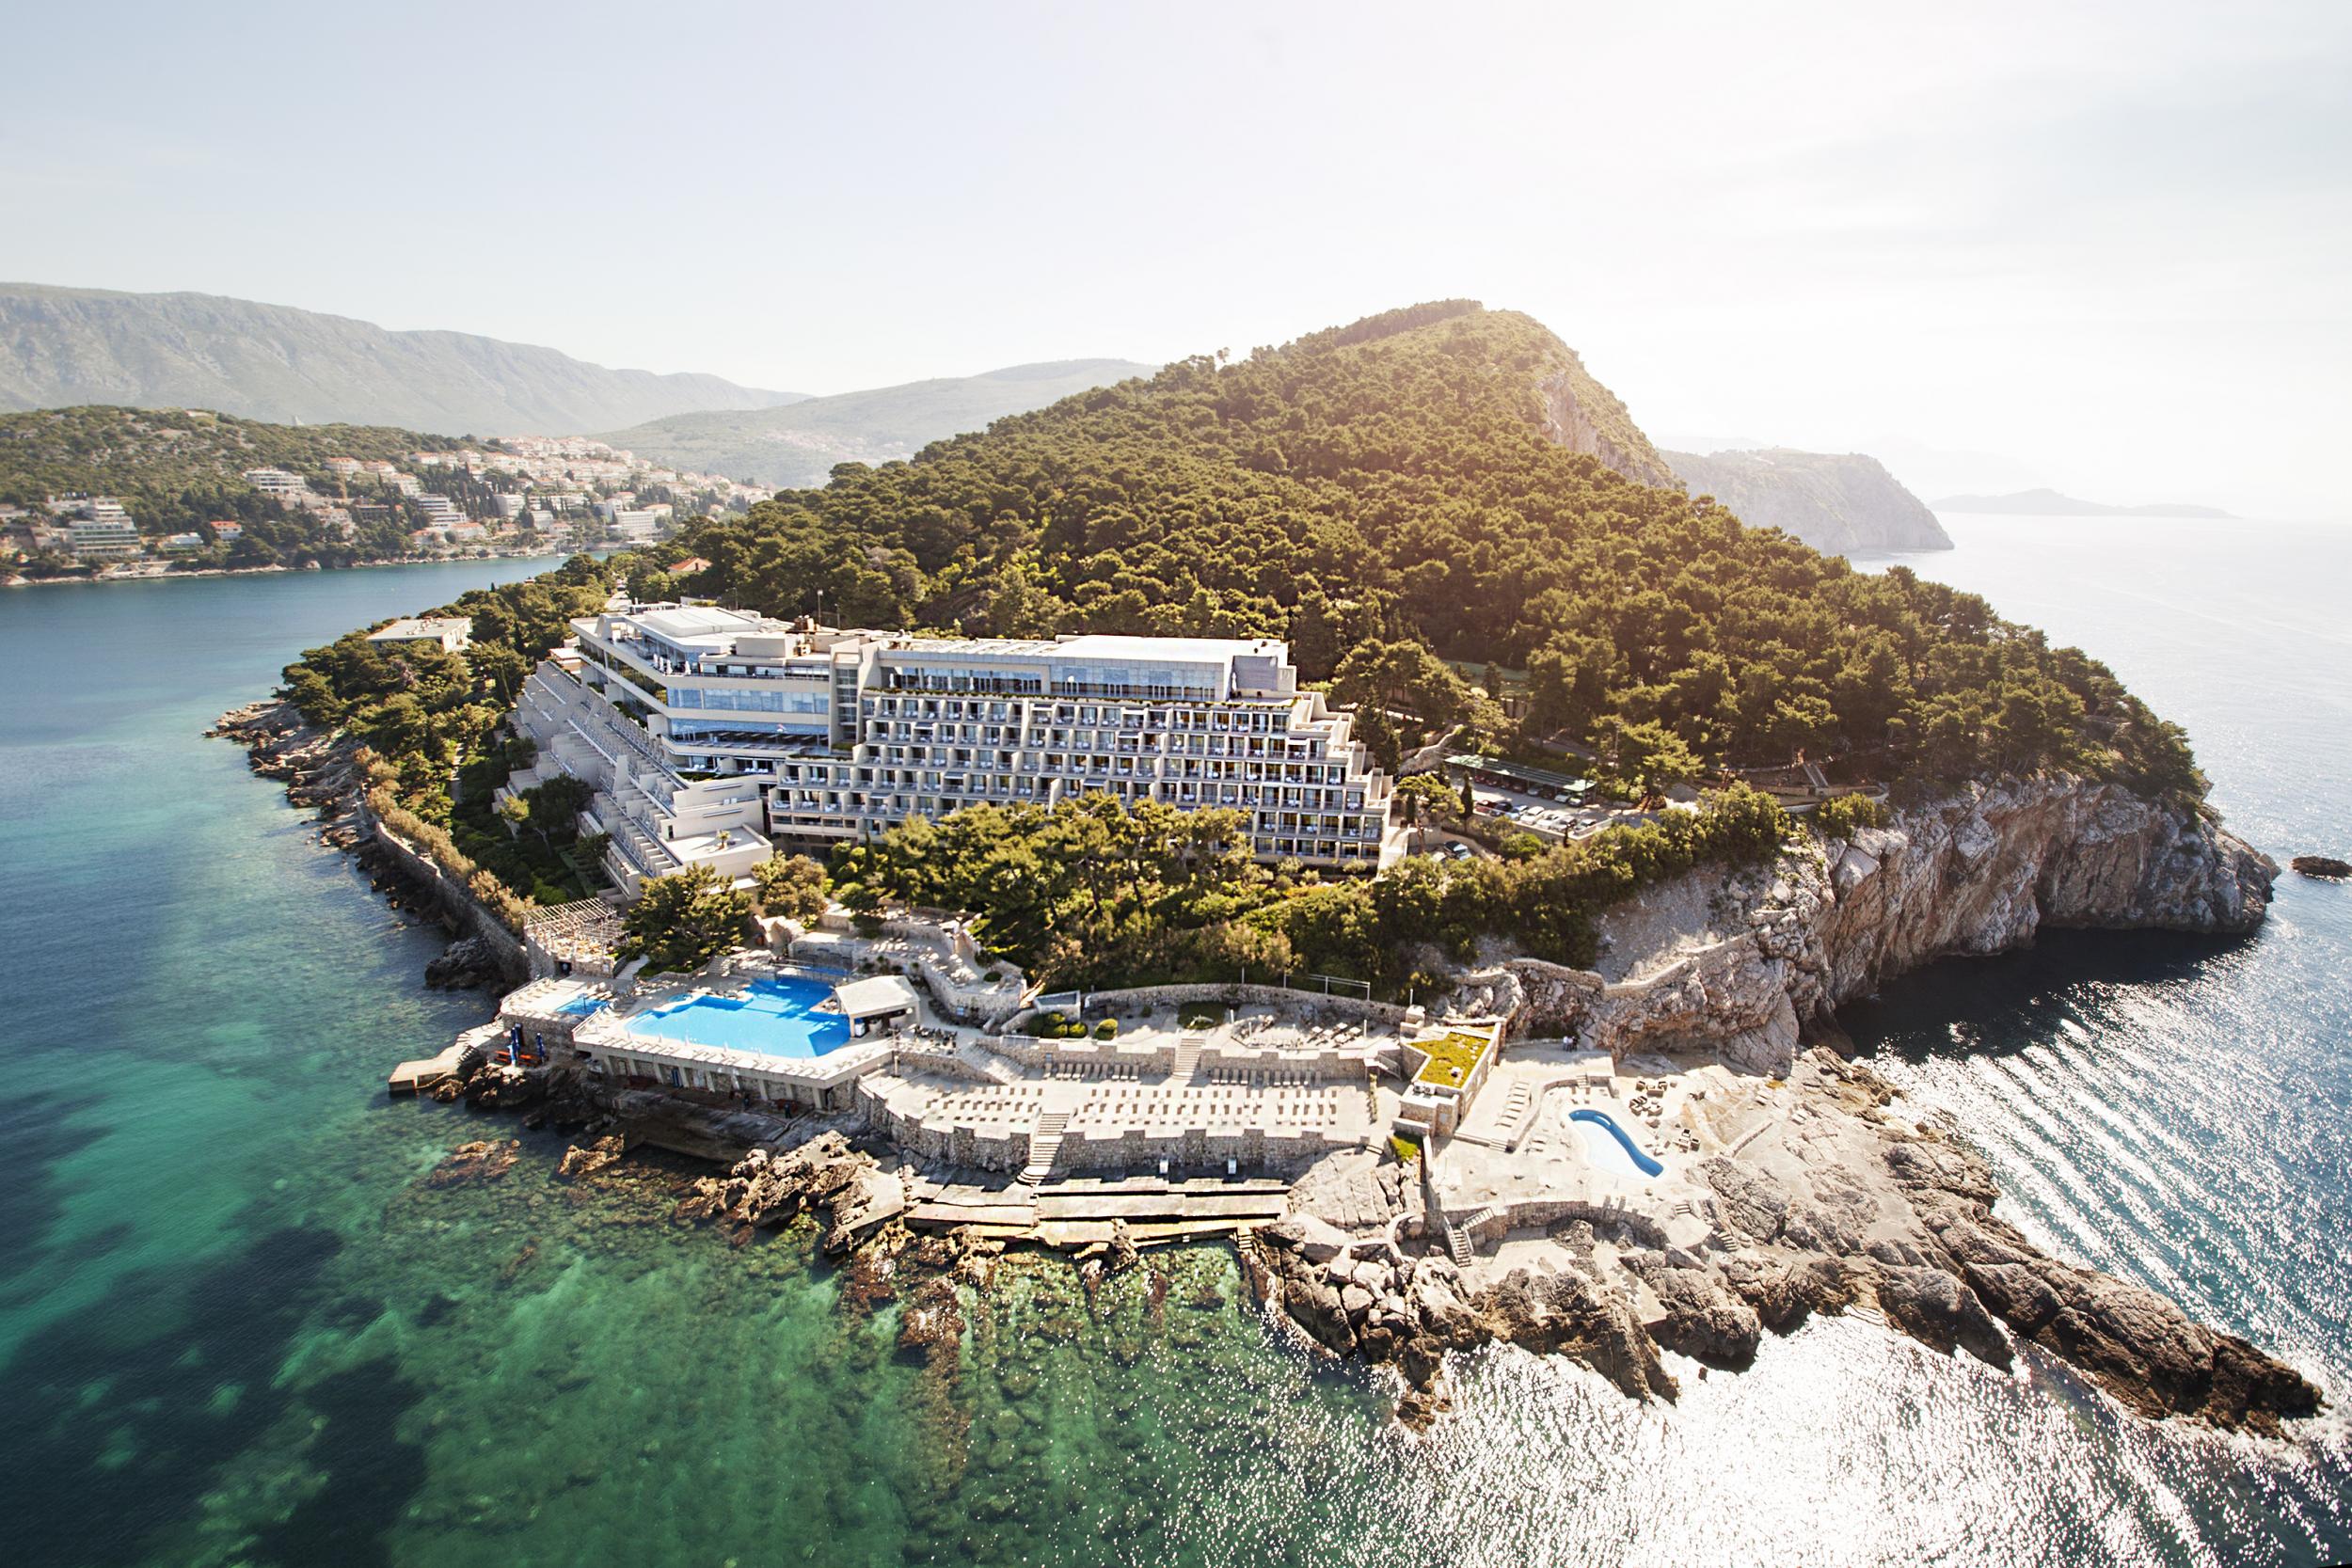 The Hotel Dubrovnik Palace: ideal for families